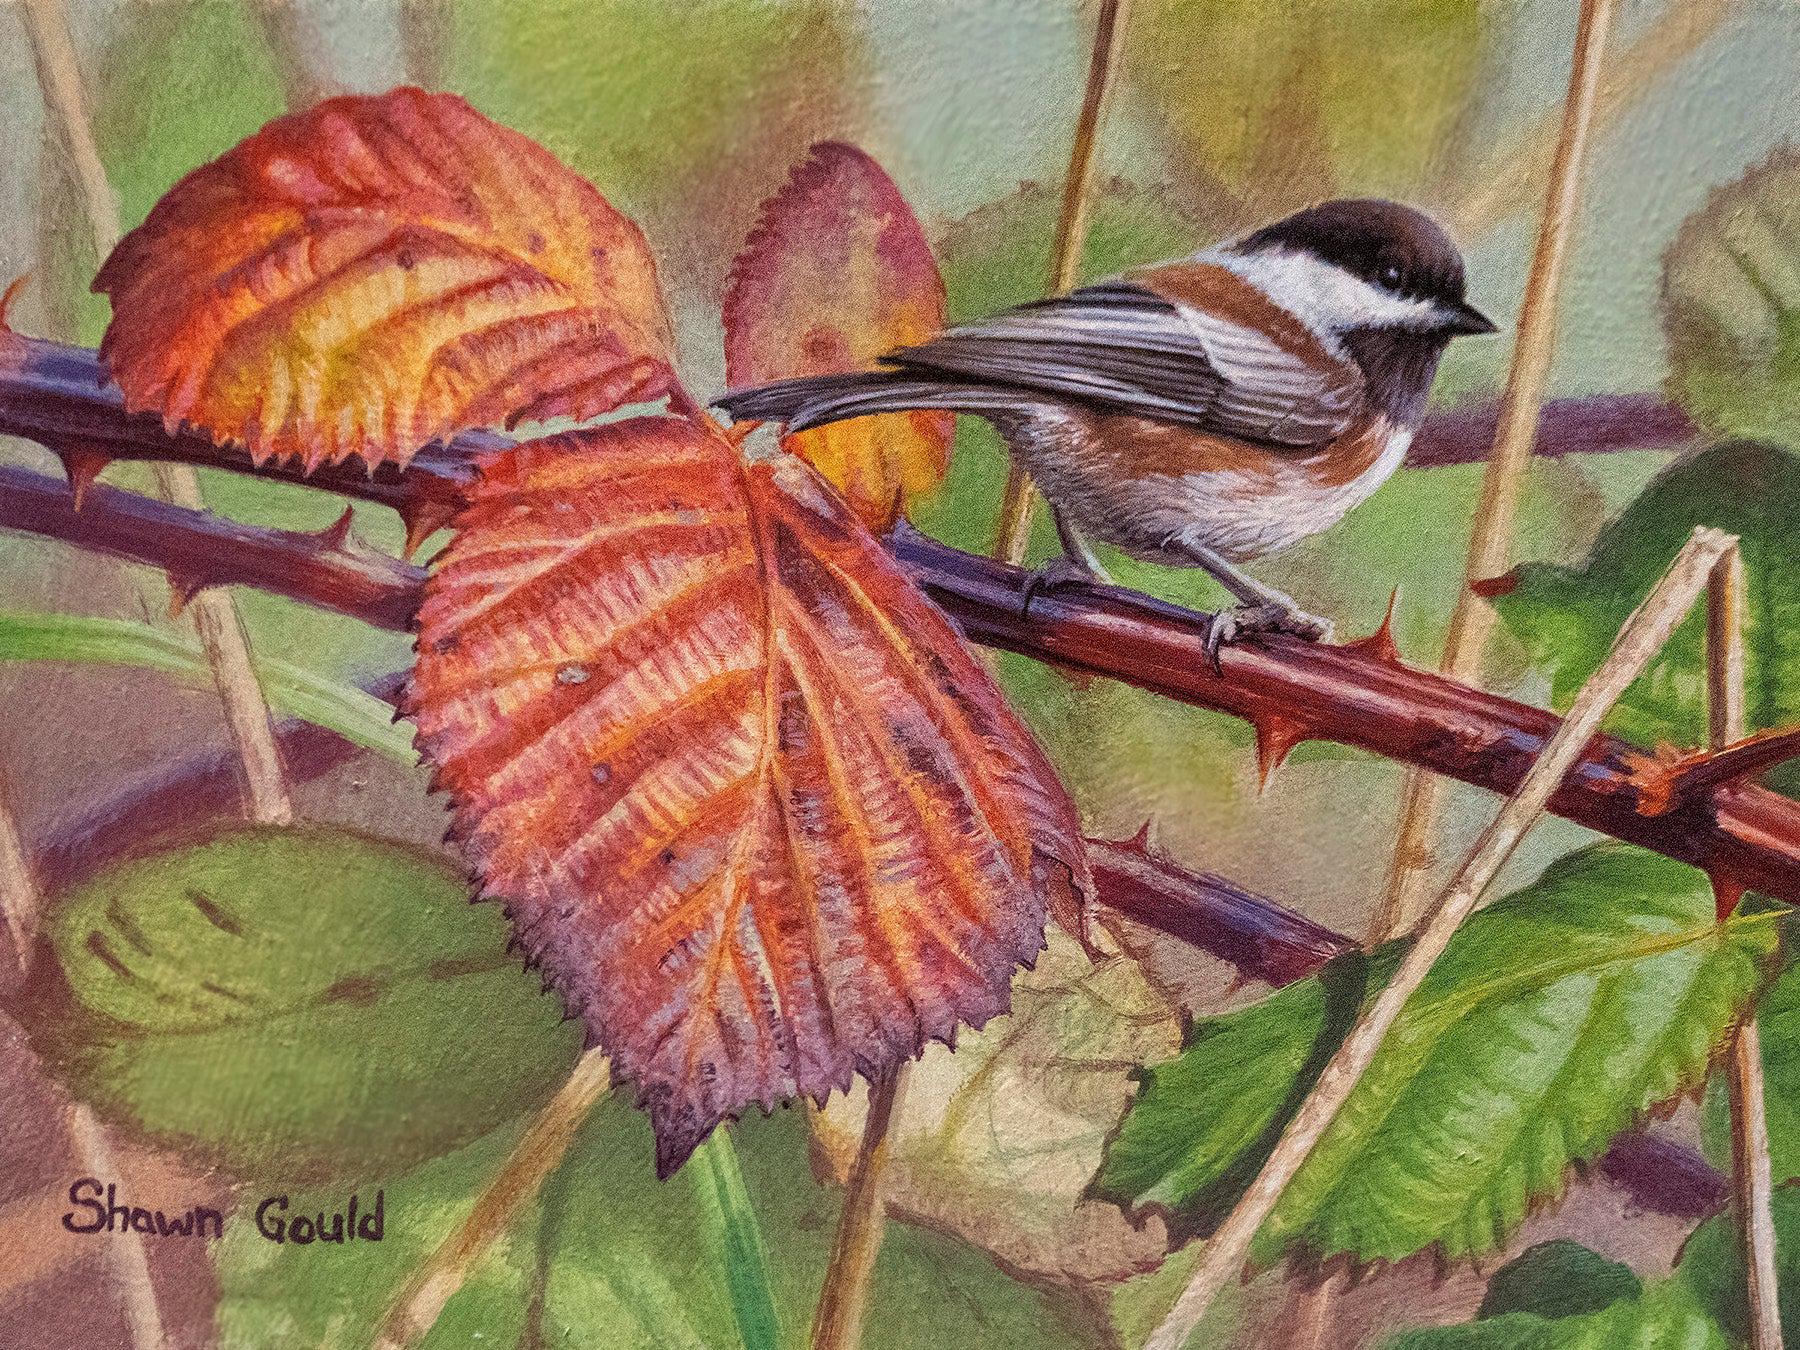 Chestnut-backed Chickadee-Painting-Shawn Gould-Sorrel Sky Gallery